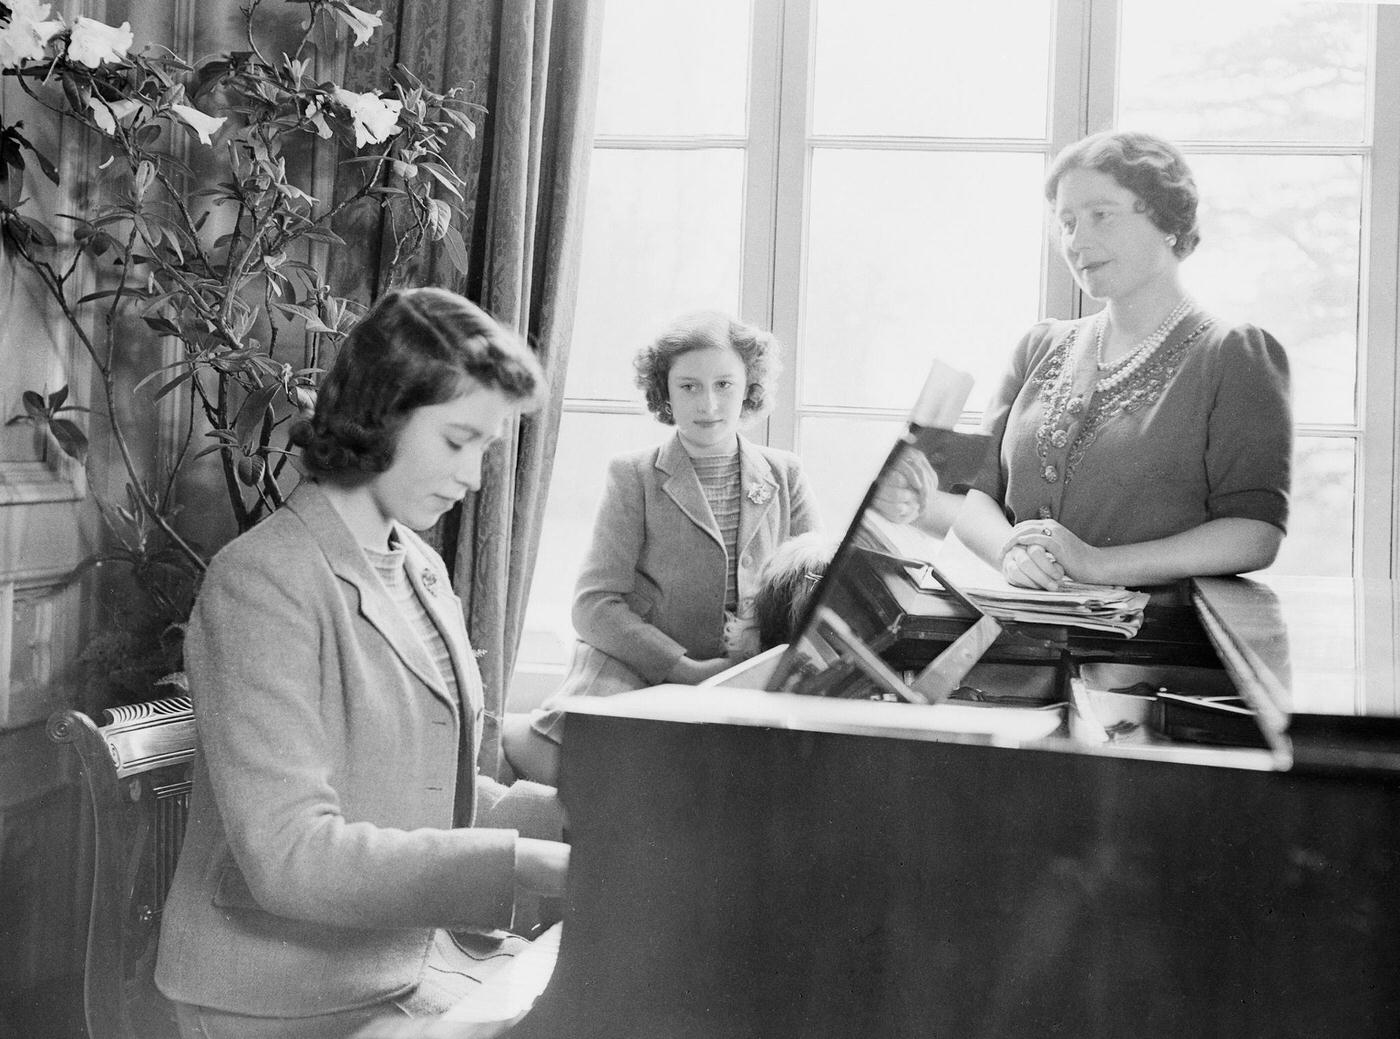 Princess Elizabeth plays the piano as Queen Elizabeth and Princess Margaret look on at the Royal Lodge in Windsor Castle, England on April 11, 1942.